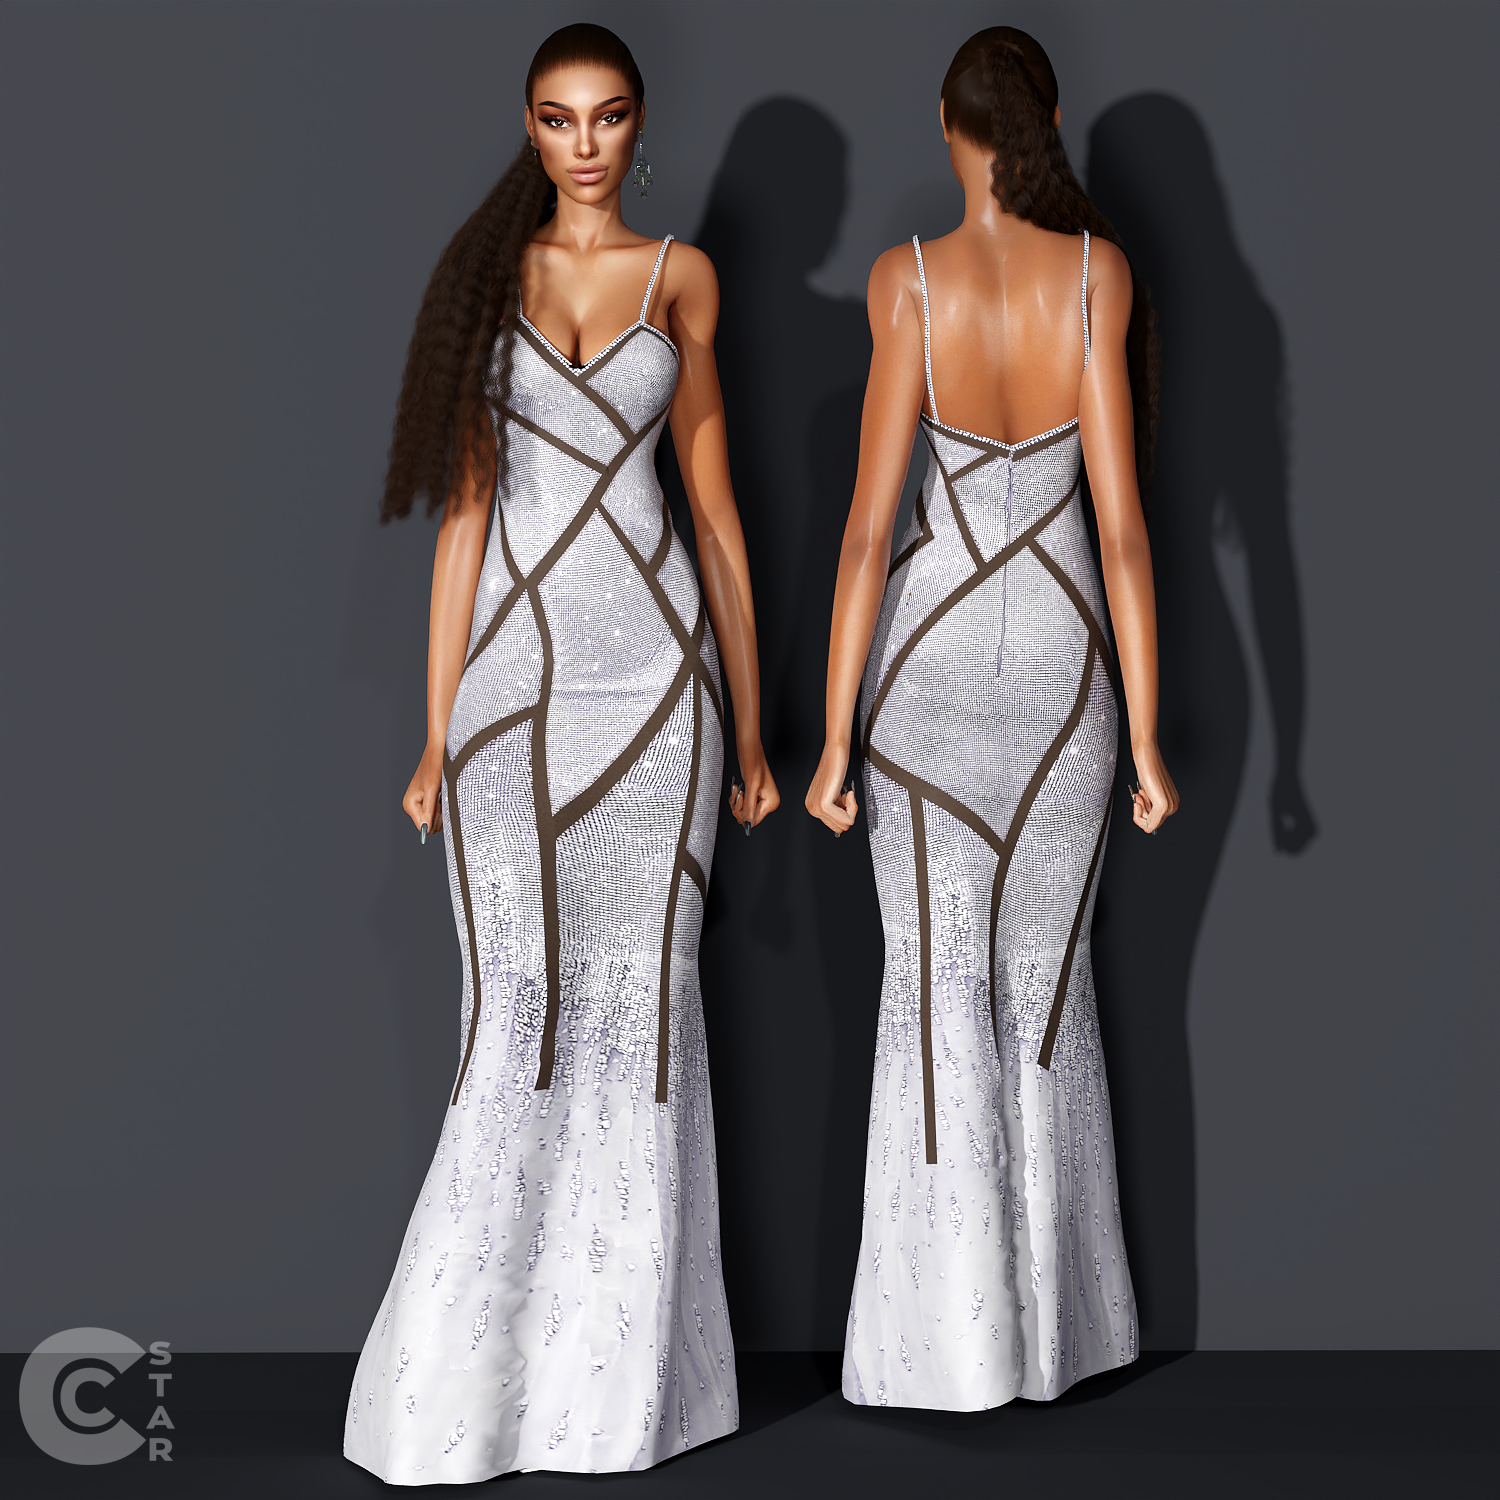 Sequin Long Dress With Sheer Panels - The Sims 4 Create a Sim - CurseForge